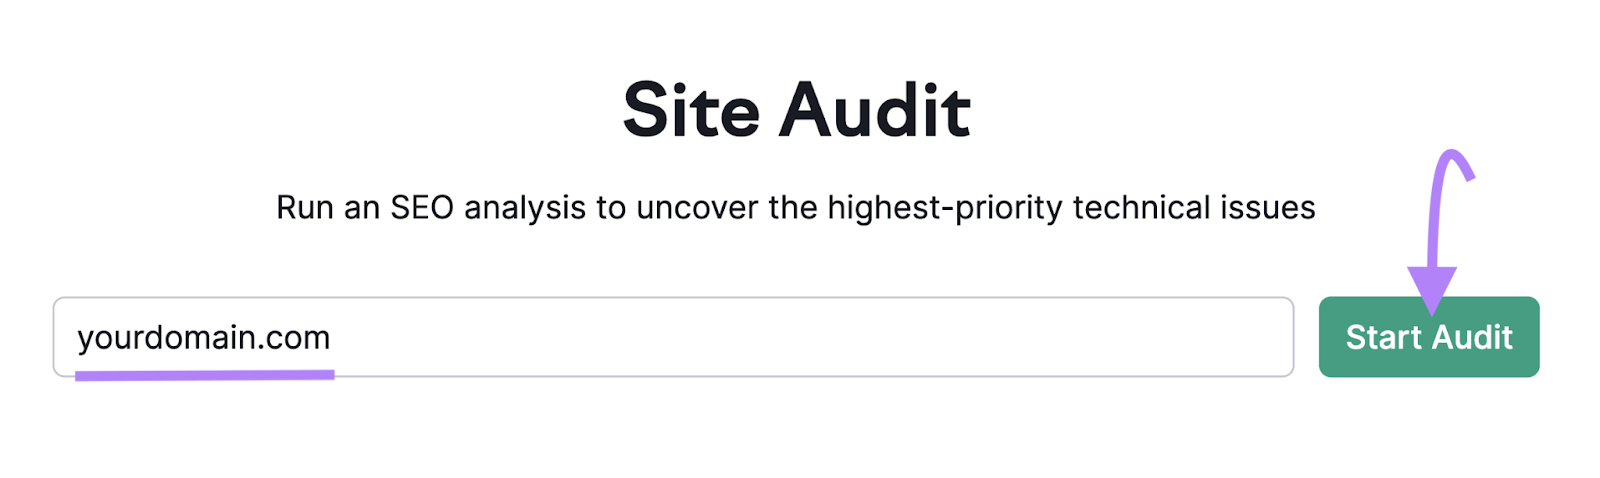 Search bar in the Site Audit tool